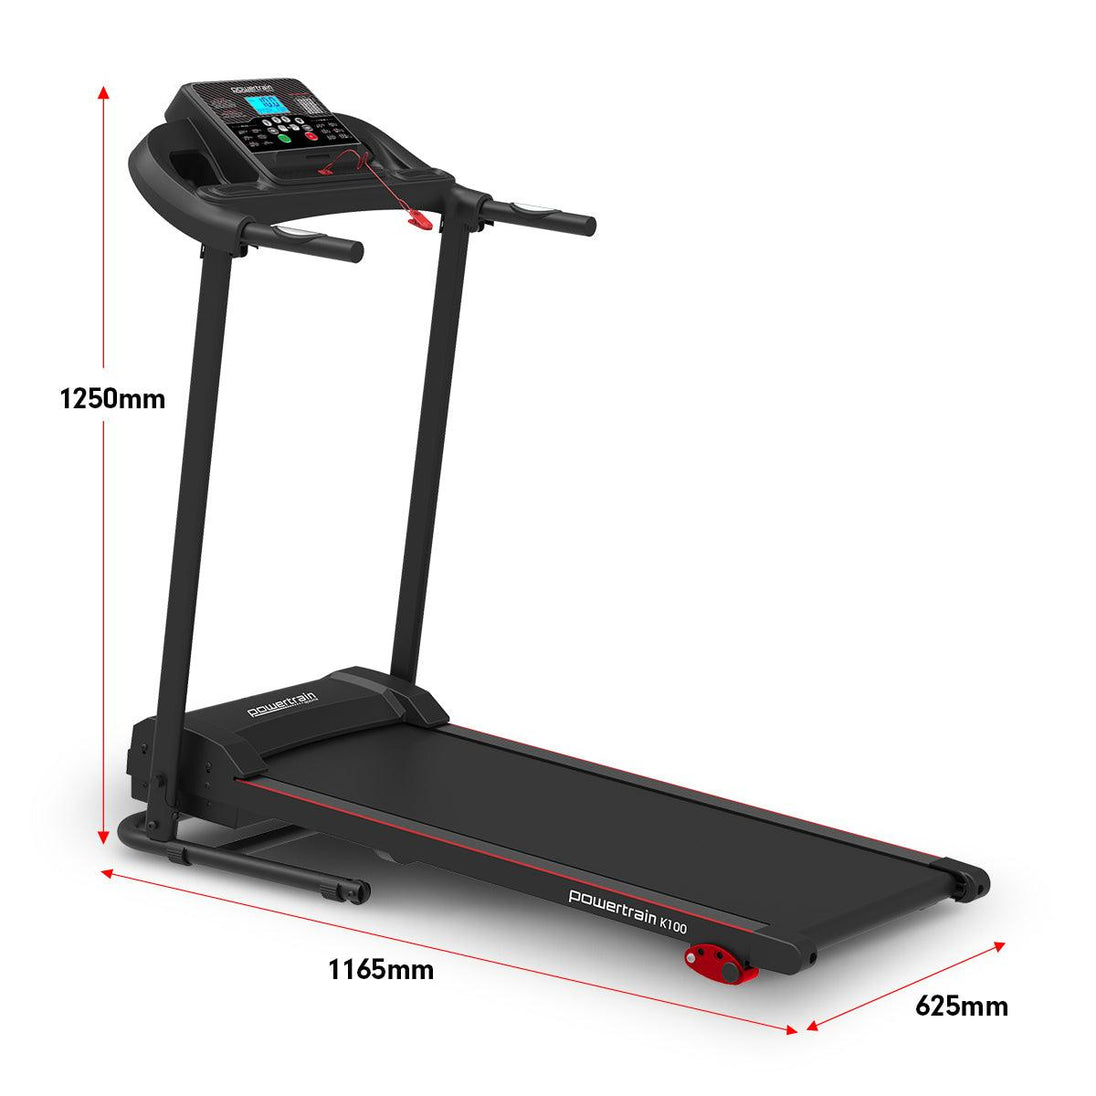 Powertrain K100 Electric Treadmill Foldable Home Gym Cardio Products On Sale Australia | Sports & Fitness > Fitness Accessories Category